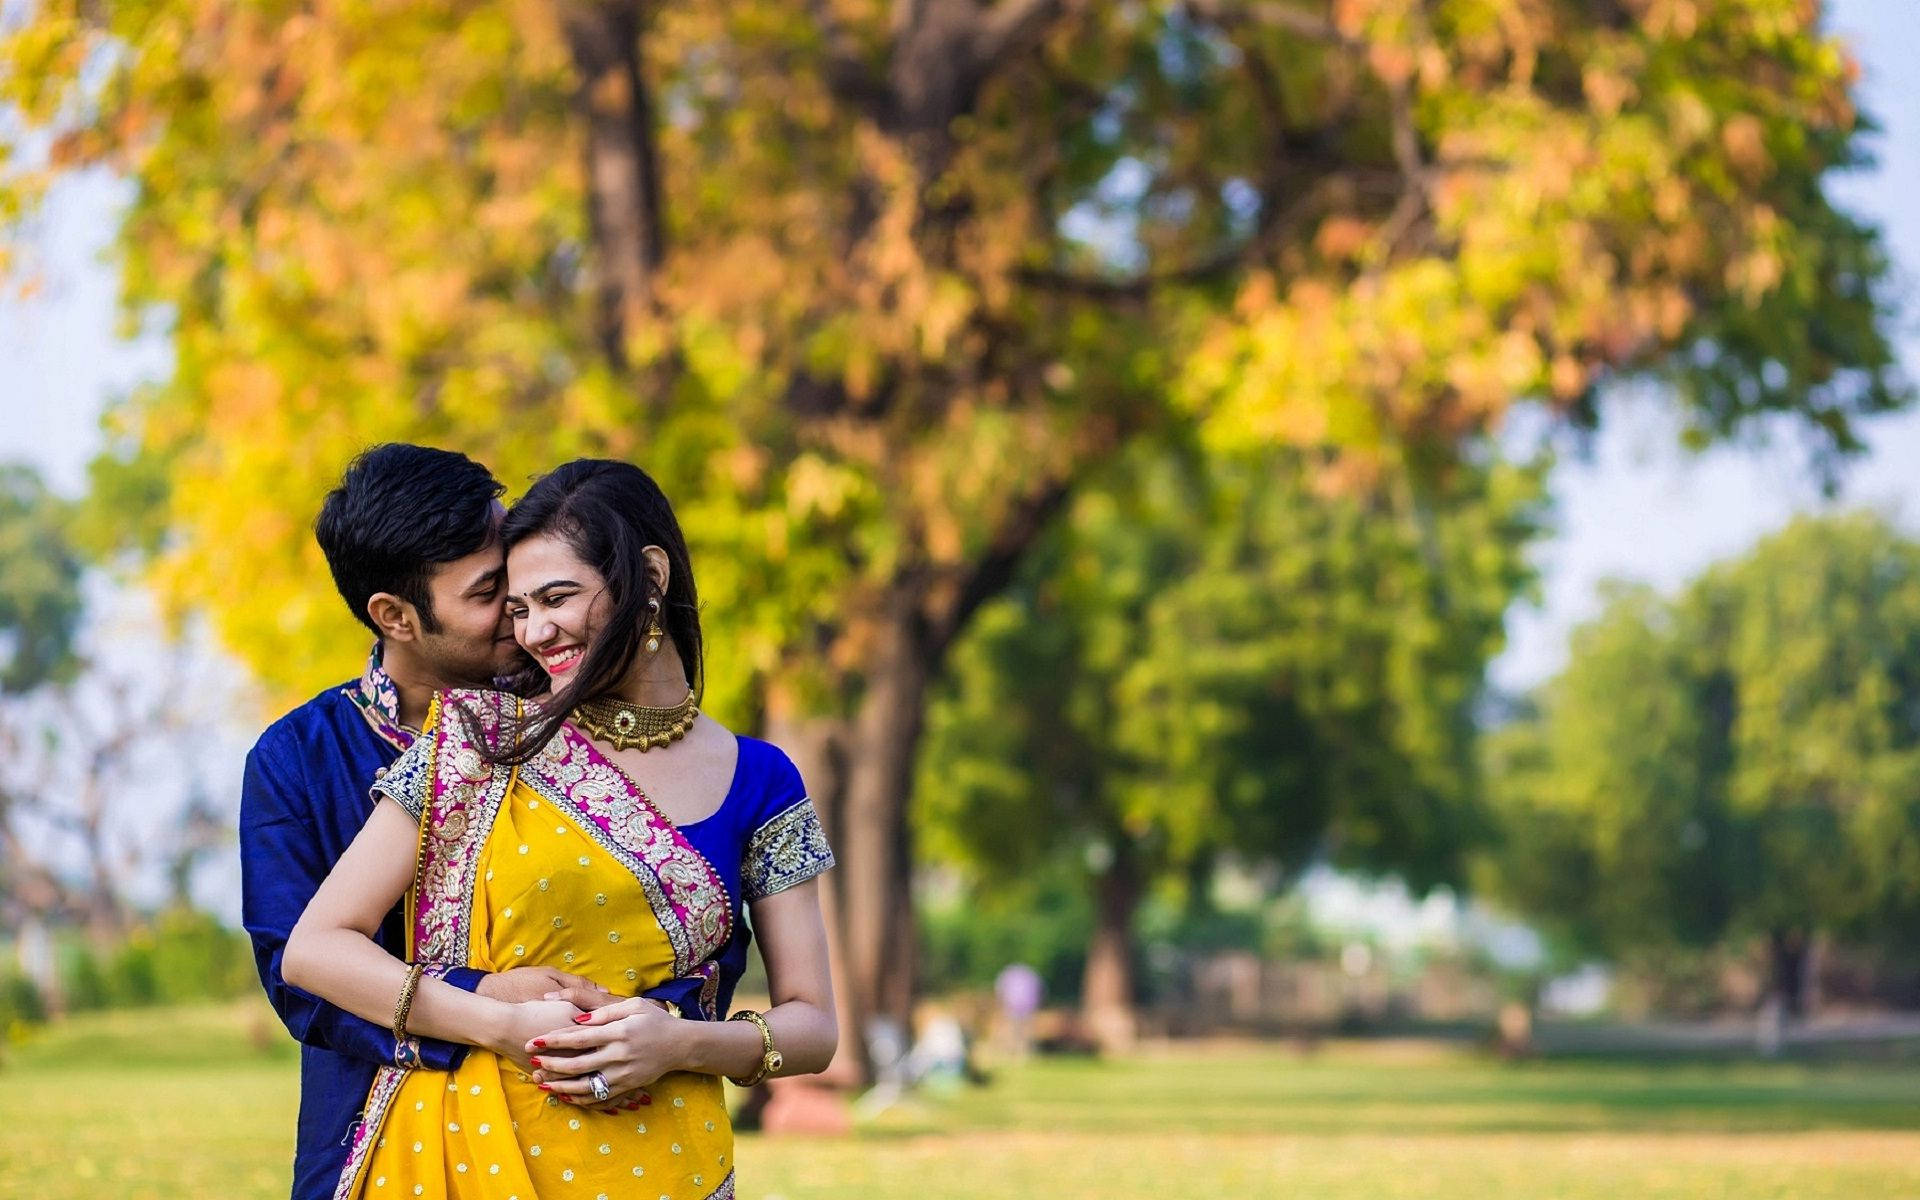 Cute Indian Couple In Wedding Attire At Park